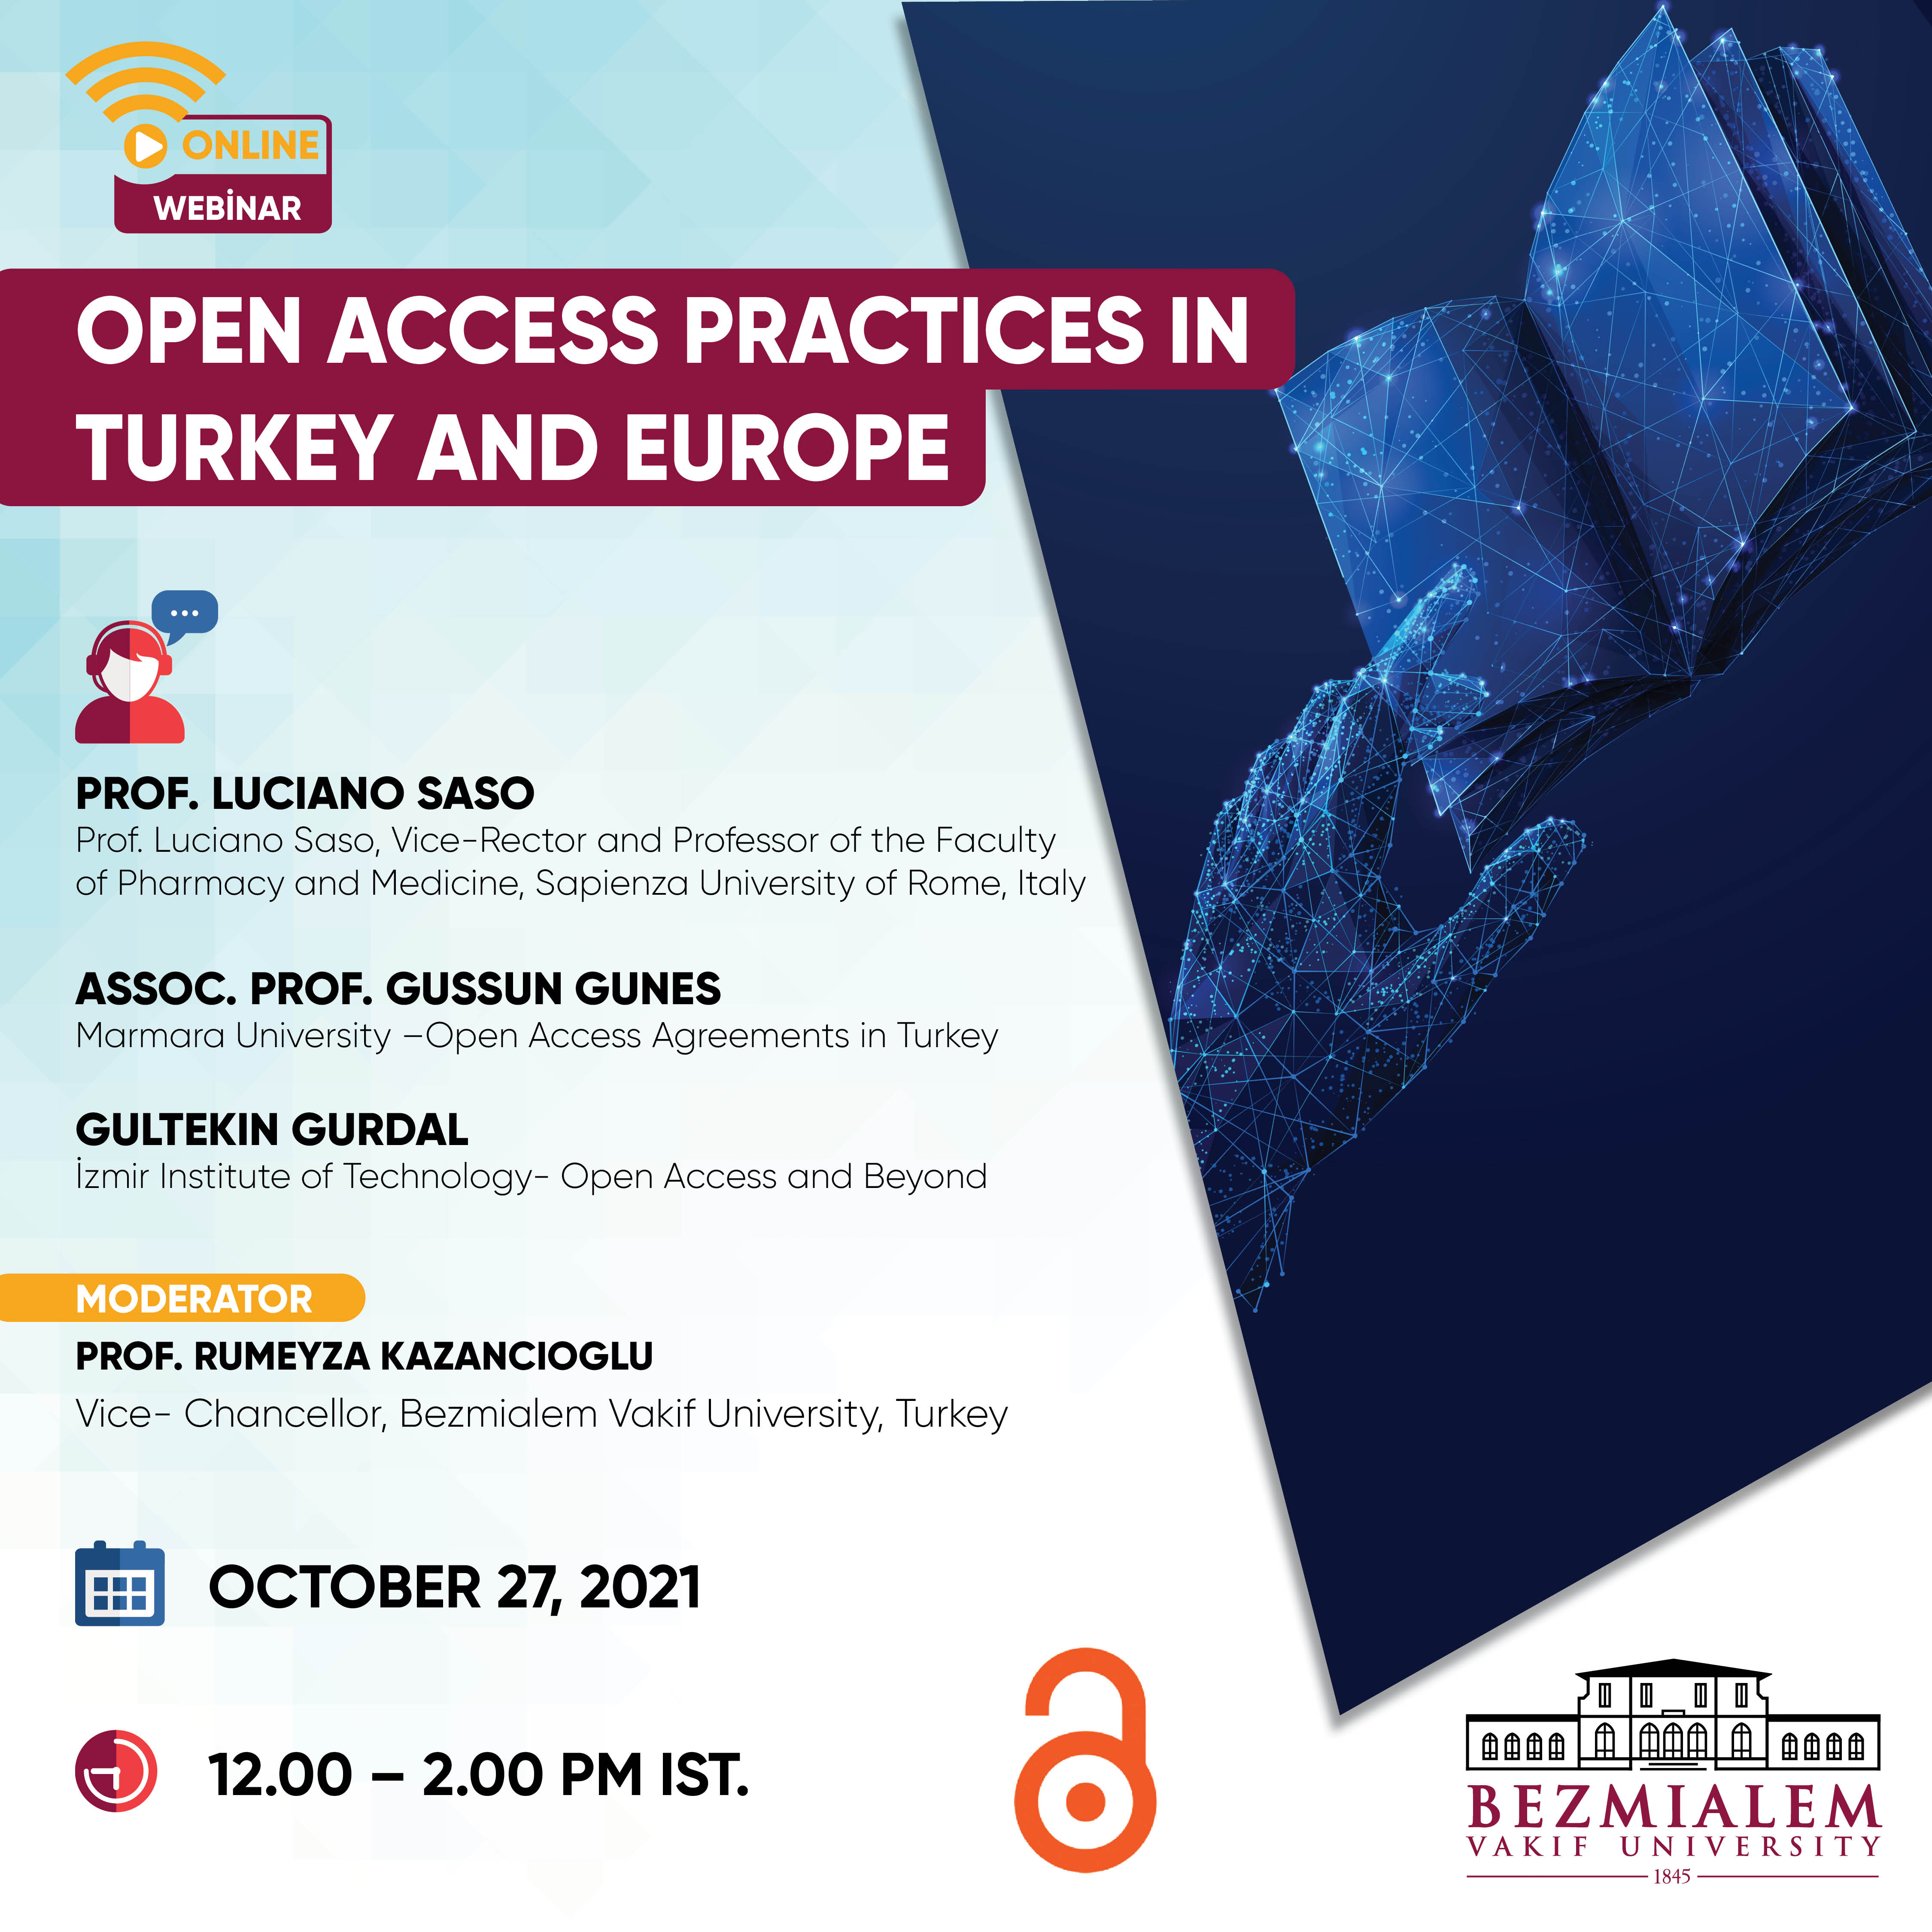 OPEN ACCESS PRACTICES IN TURKEY AND EUROPE INSTAGRAM.jpg